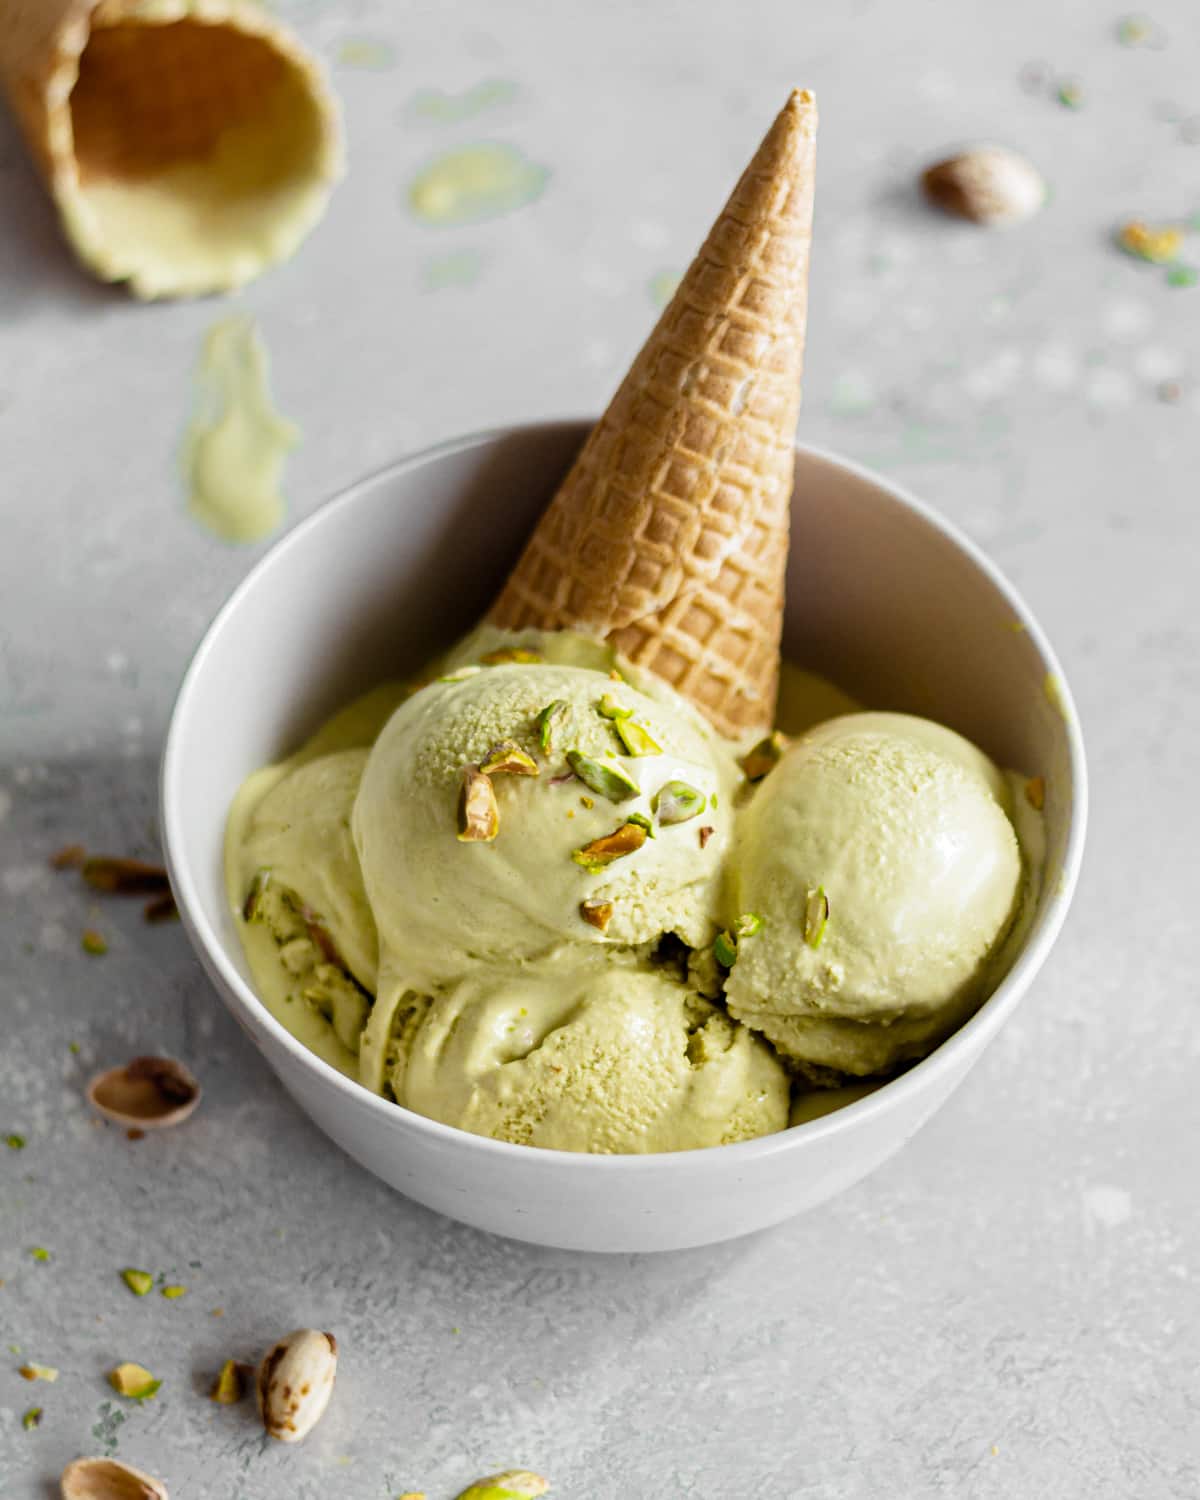 homemade pistachio ice cream in a bowl with a waffle cone.